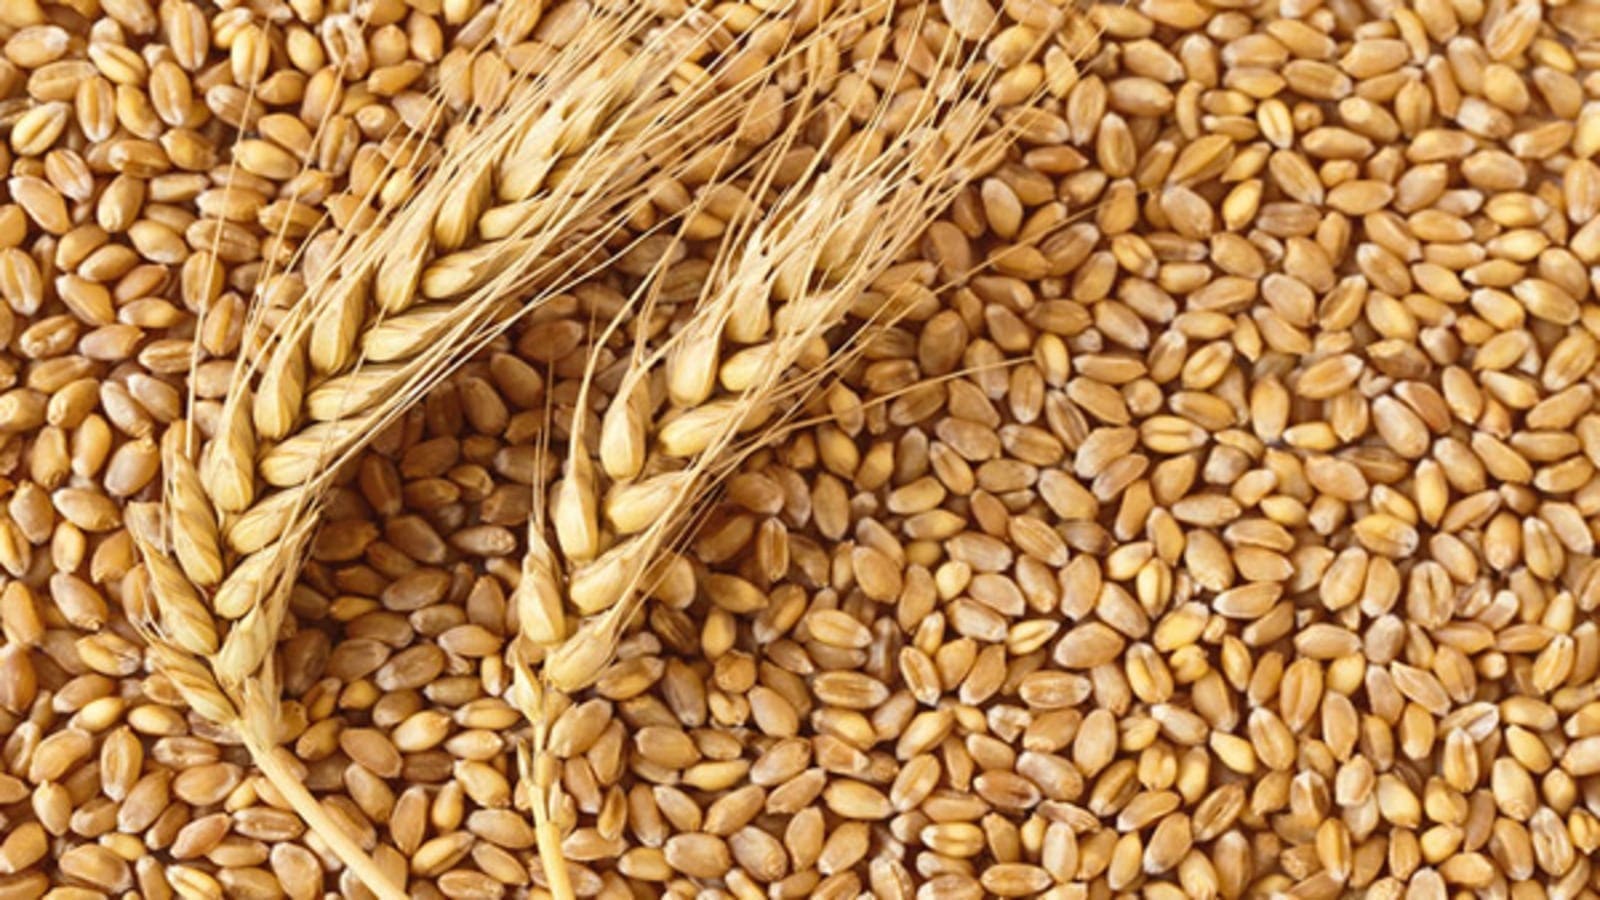 Paraguay, Indonesia to record uptick in grain production in latest USDA projections